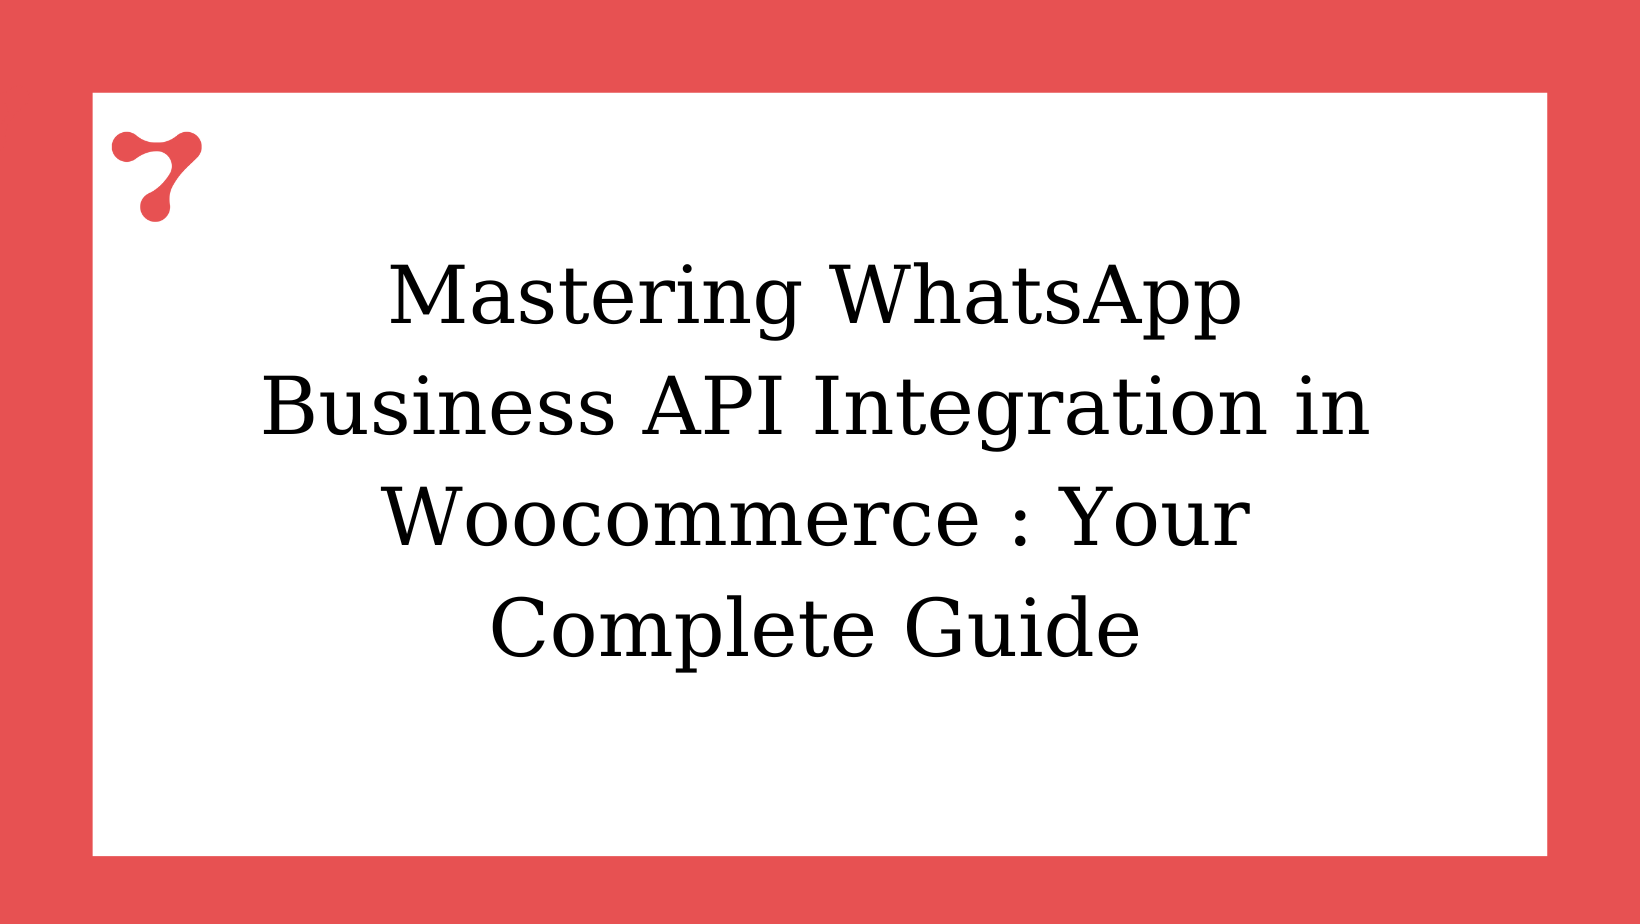 Mastering WhatsApp Business API Integration in Woocommerce : Your Complete Guide